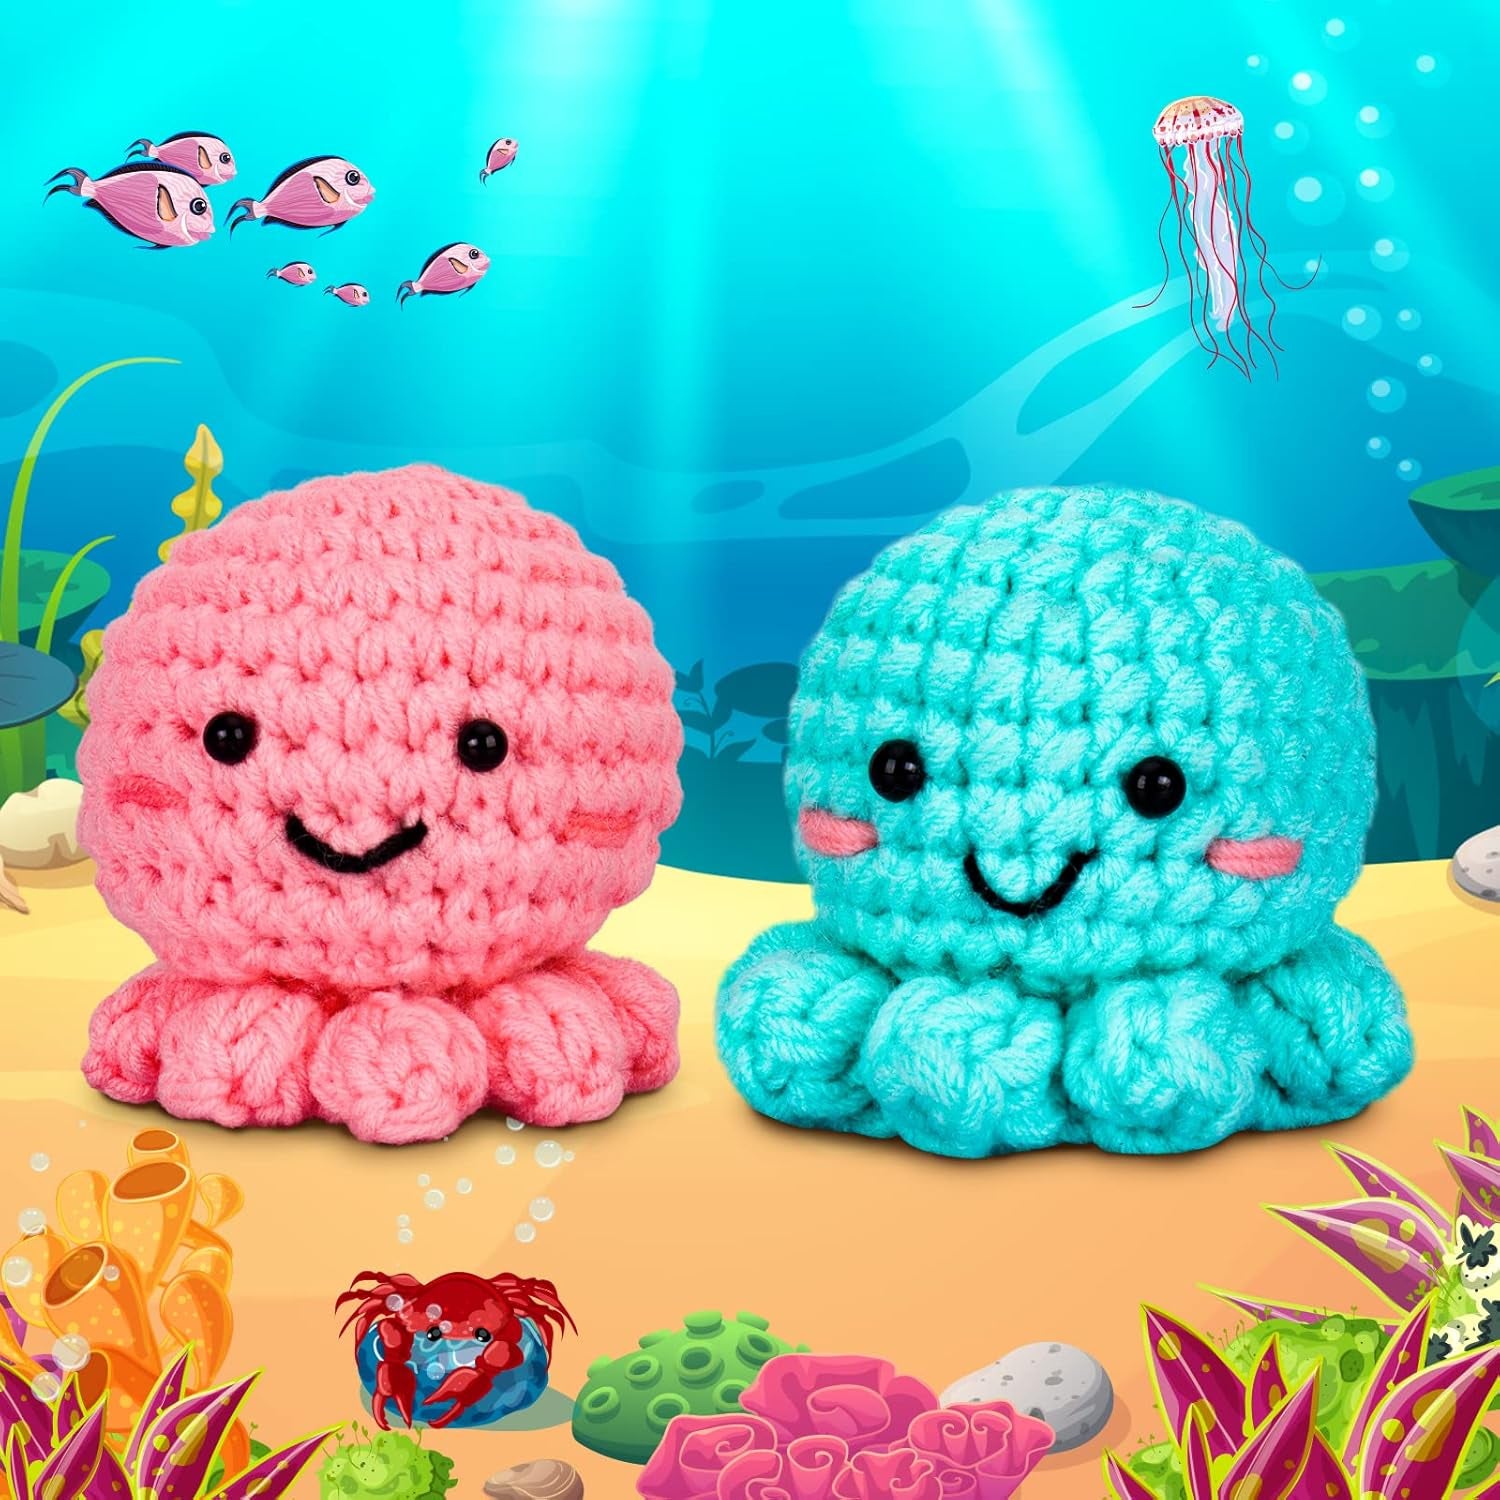 Crochet Kit for Beginners, Amigurumi Crocheting Animals Kits W Step-By-Step Video Tutorials, Knitting Starter Pack for Adults and Kids, Jumbo 2 Octopus Familly (40%+ Yarn Content)